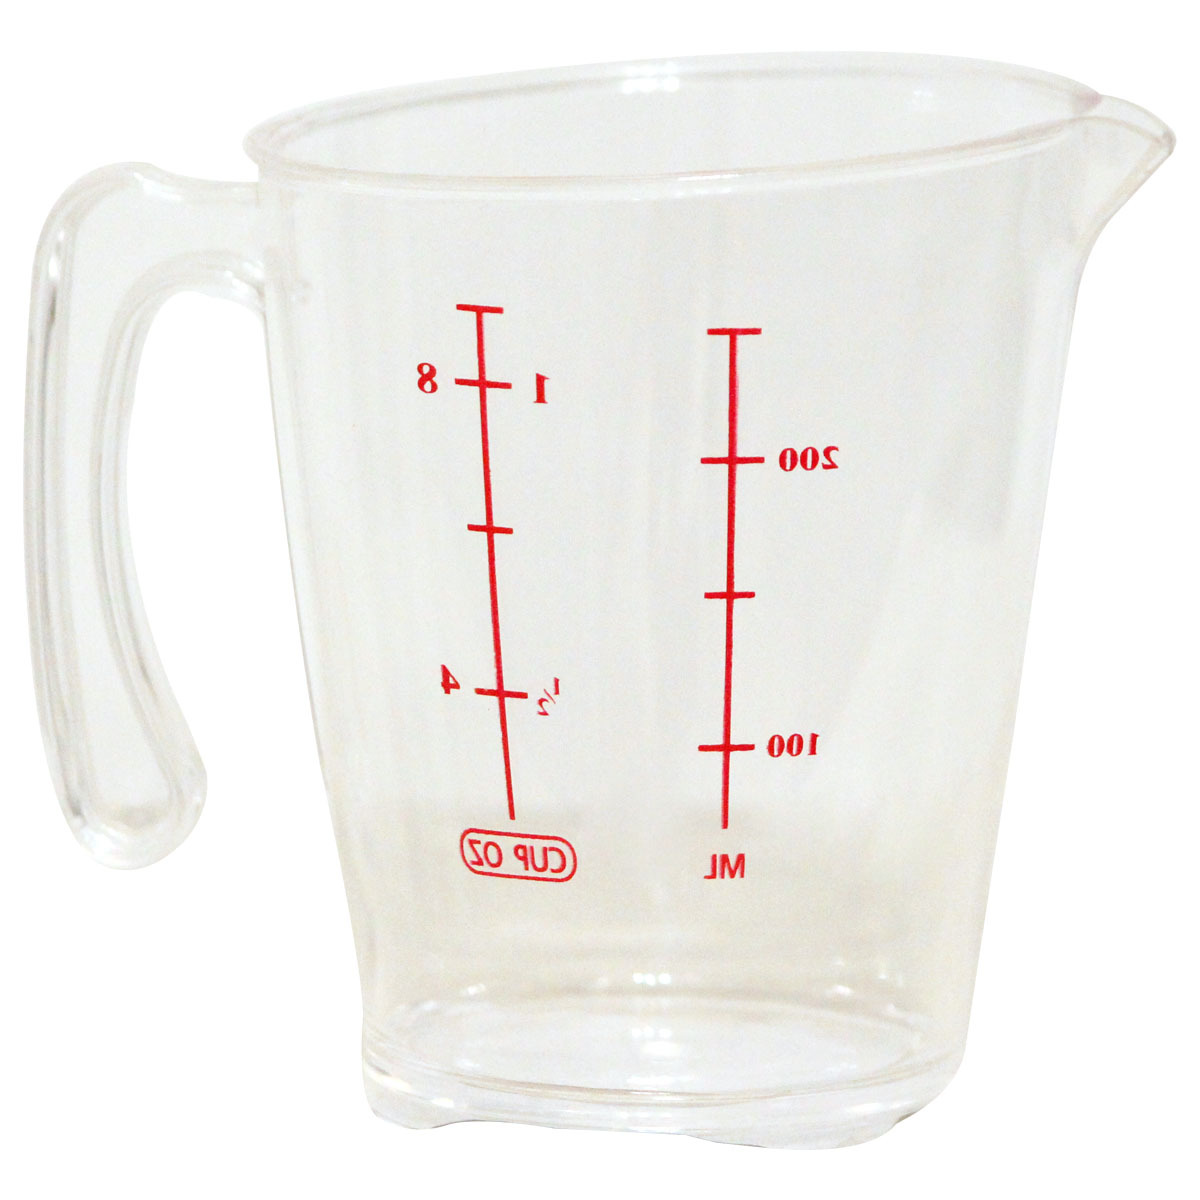 Pioneer Measuring Cups PN450A-PS